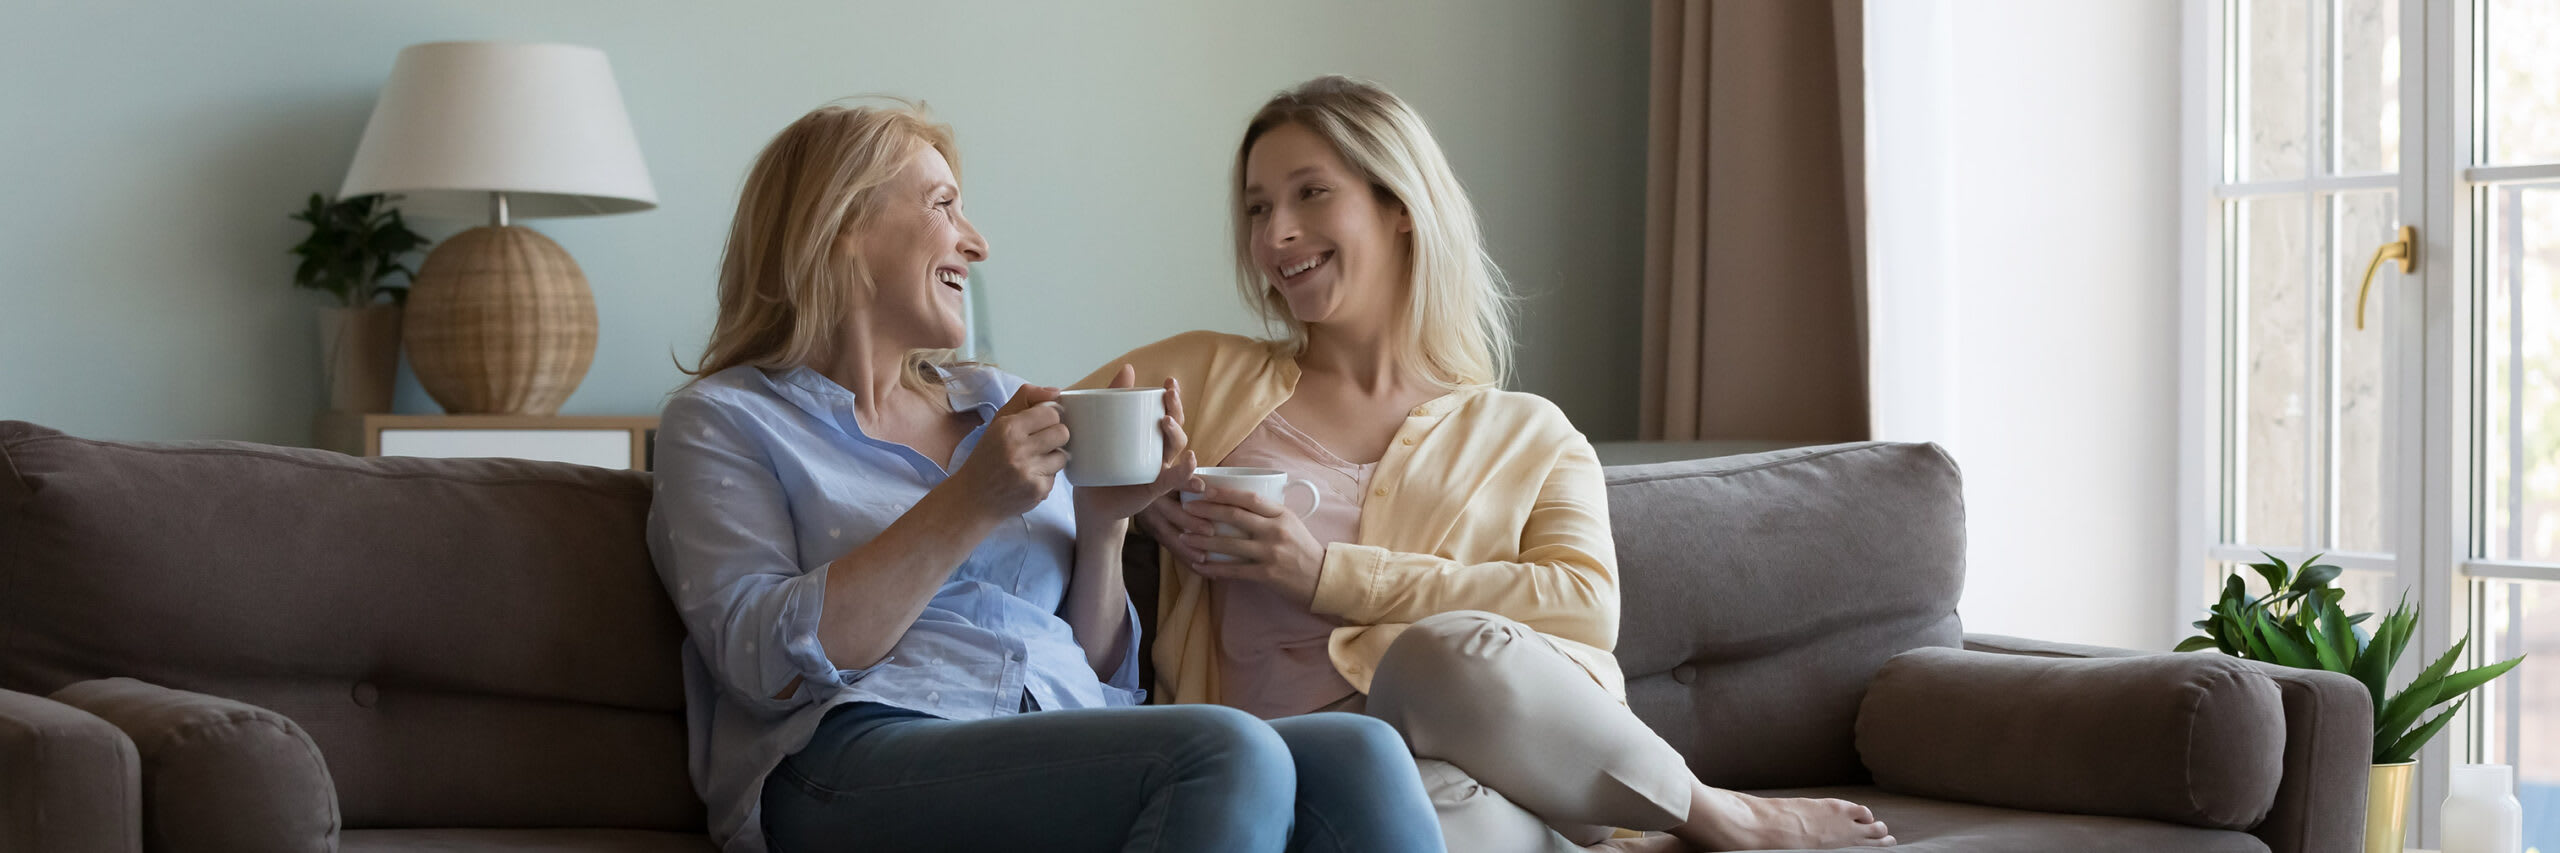 Two women smiling in conversation while sitting on a couch